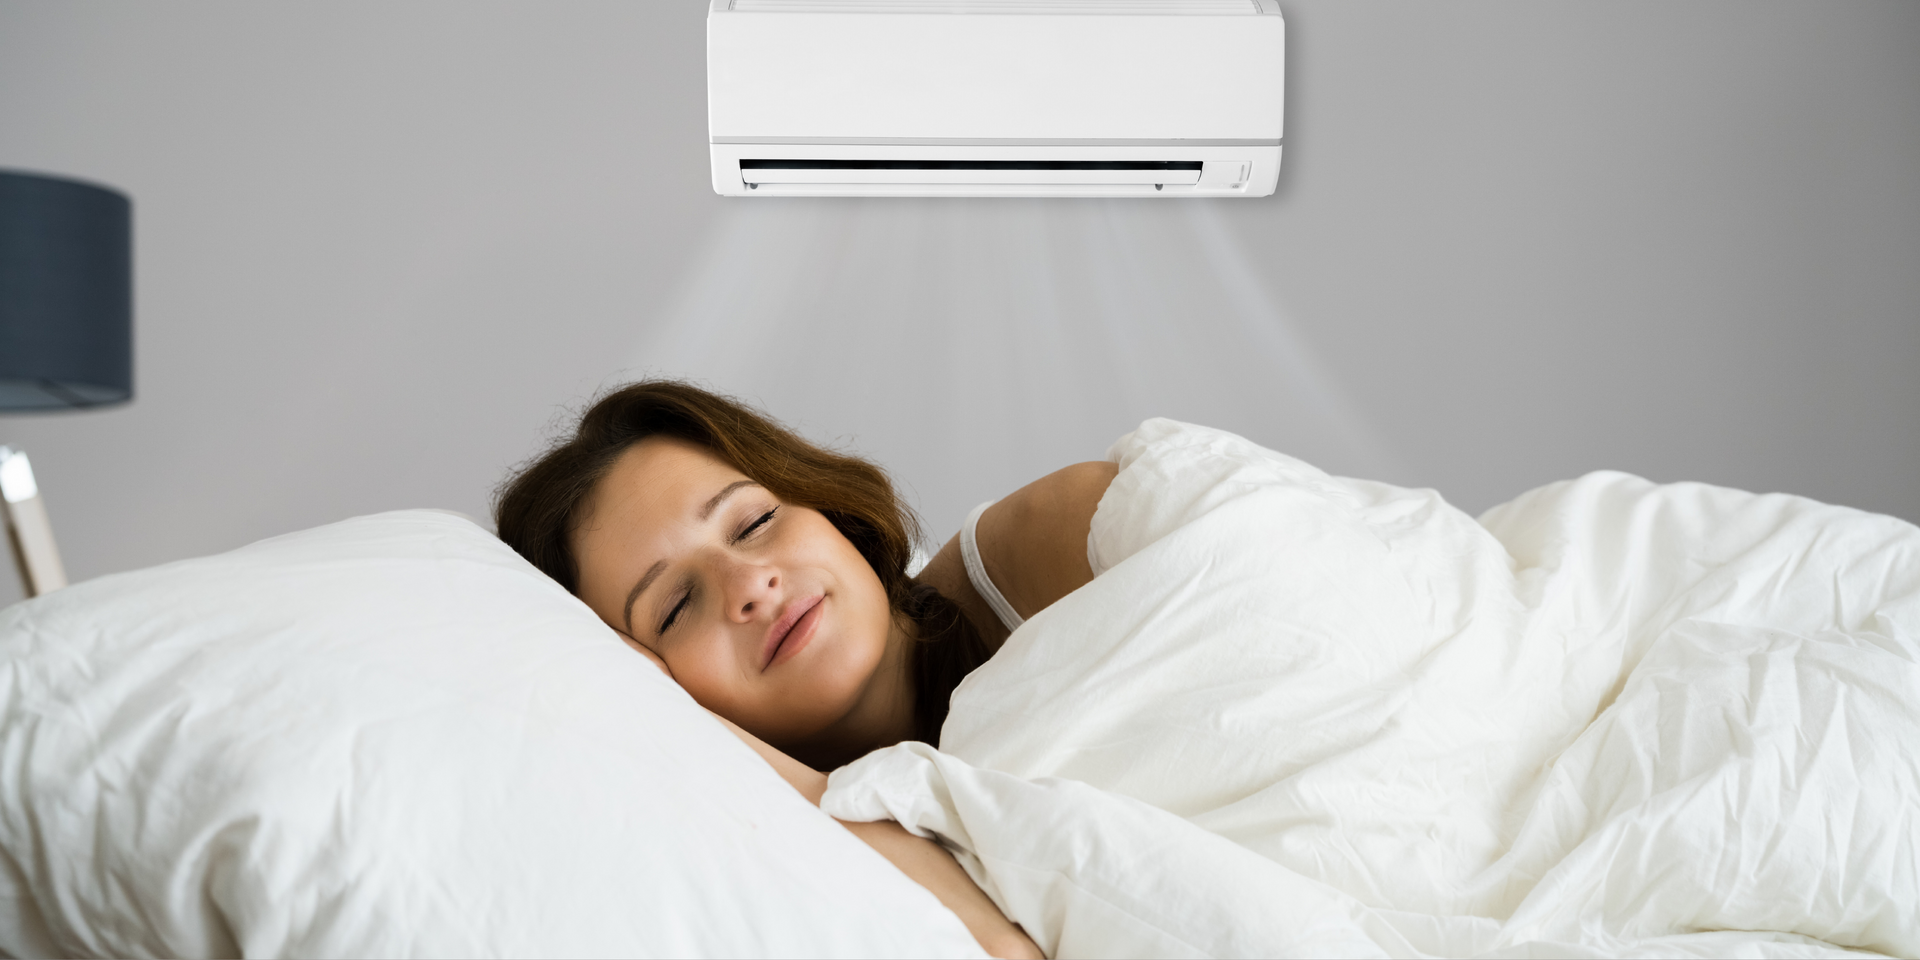 Woman in bed cooled by air conditioning